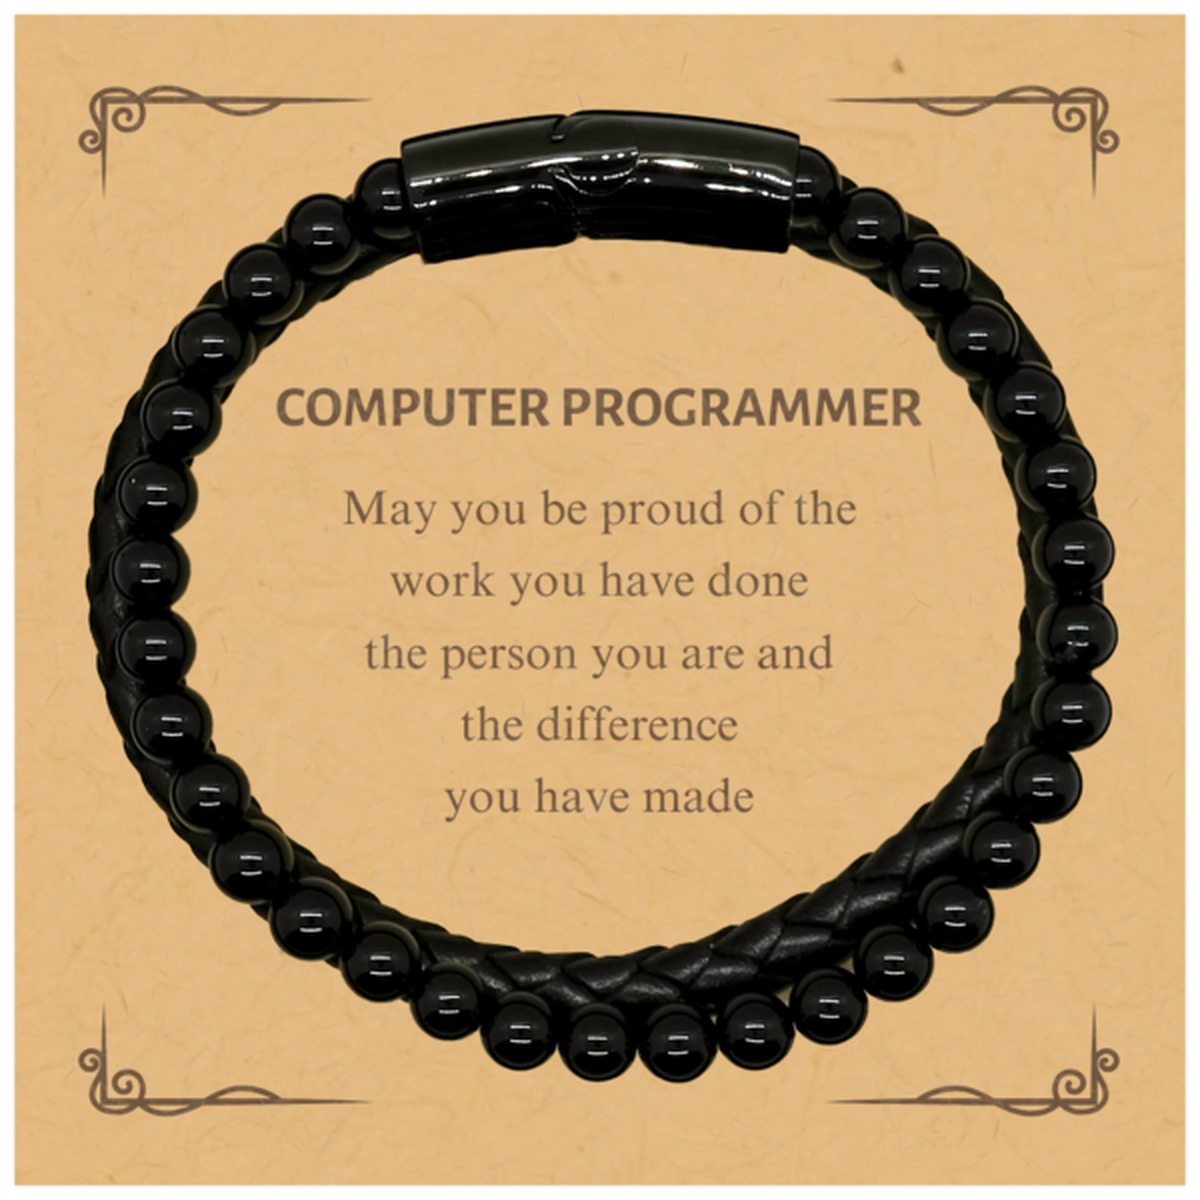 Computer Programmer May you be proud of the work you have done, Retirement Computer Programmer Stone Leather Bracelets for Colleague Appreciation Gifts Amazing for Computer Programmer